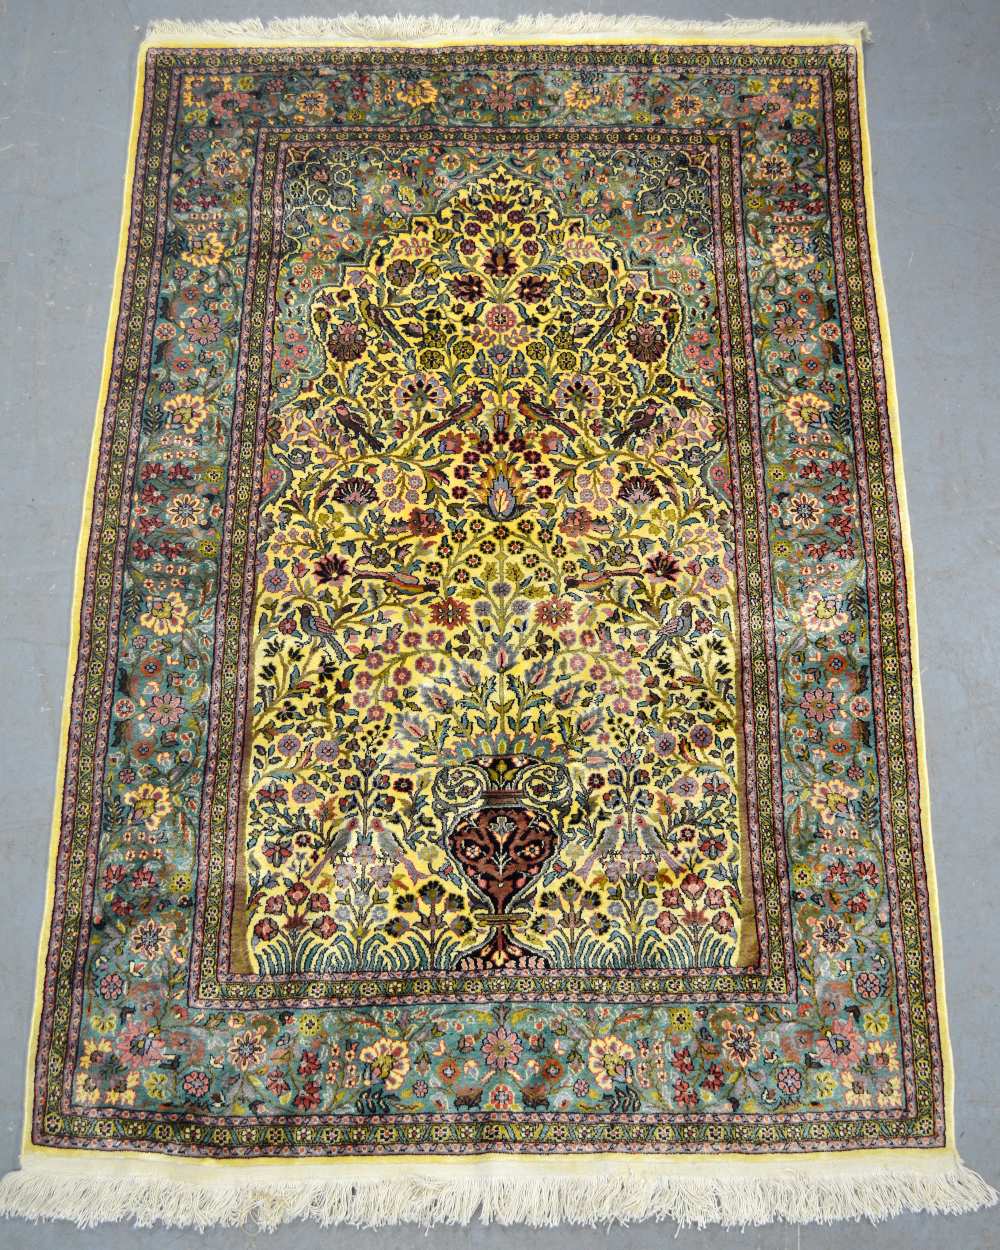 Silk Kashmir cream ground rug with a main green border centre decorated with foliate forms 72 x